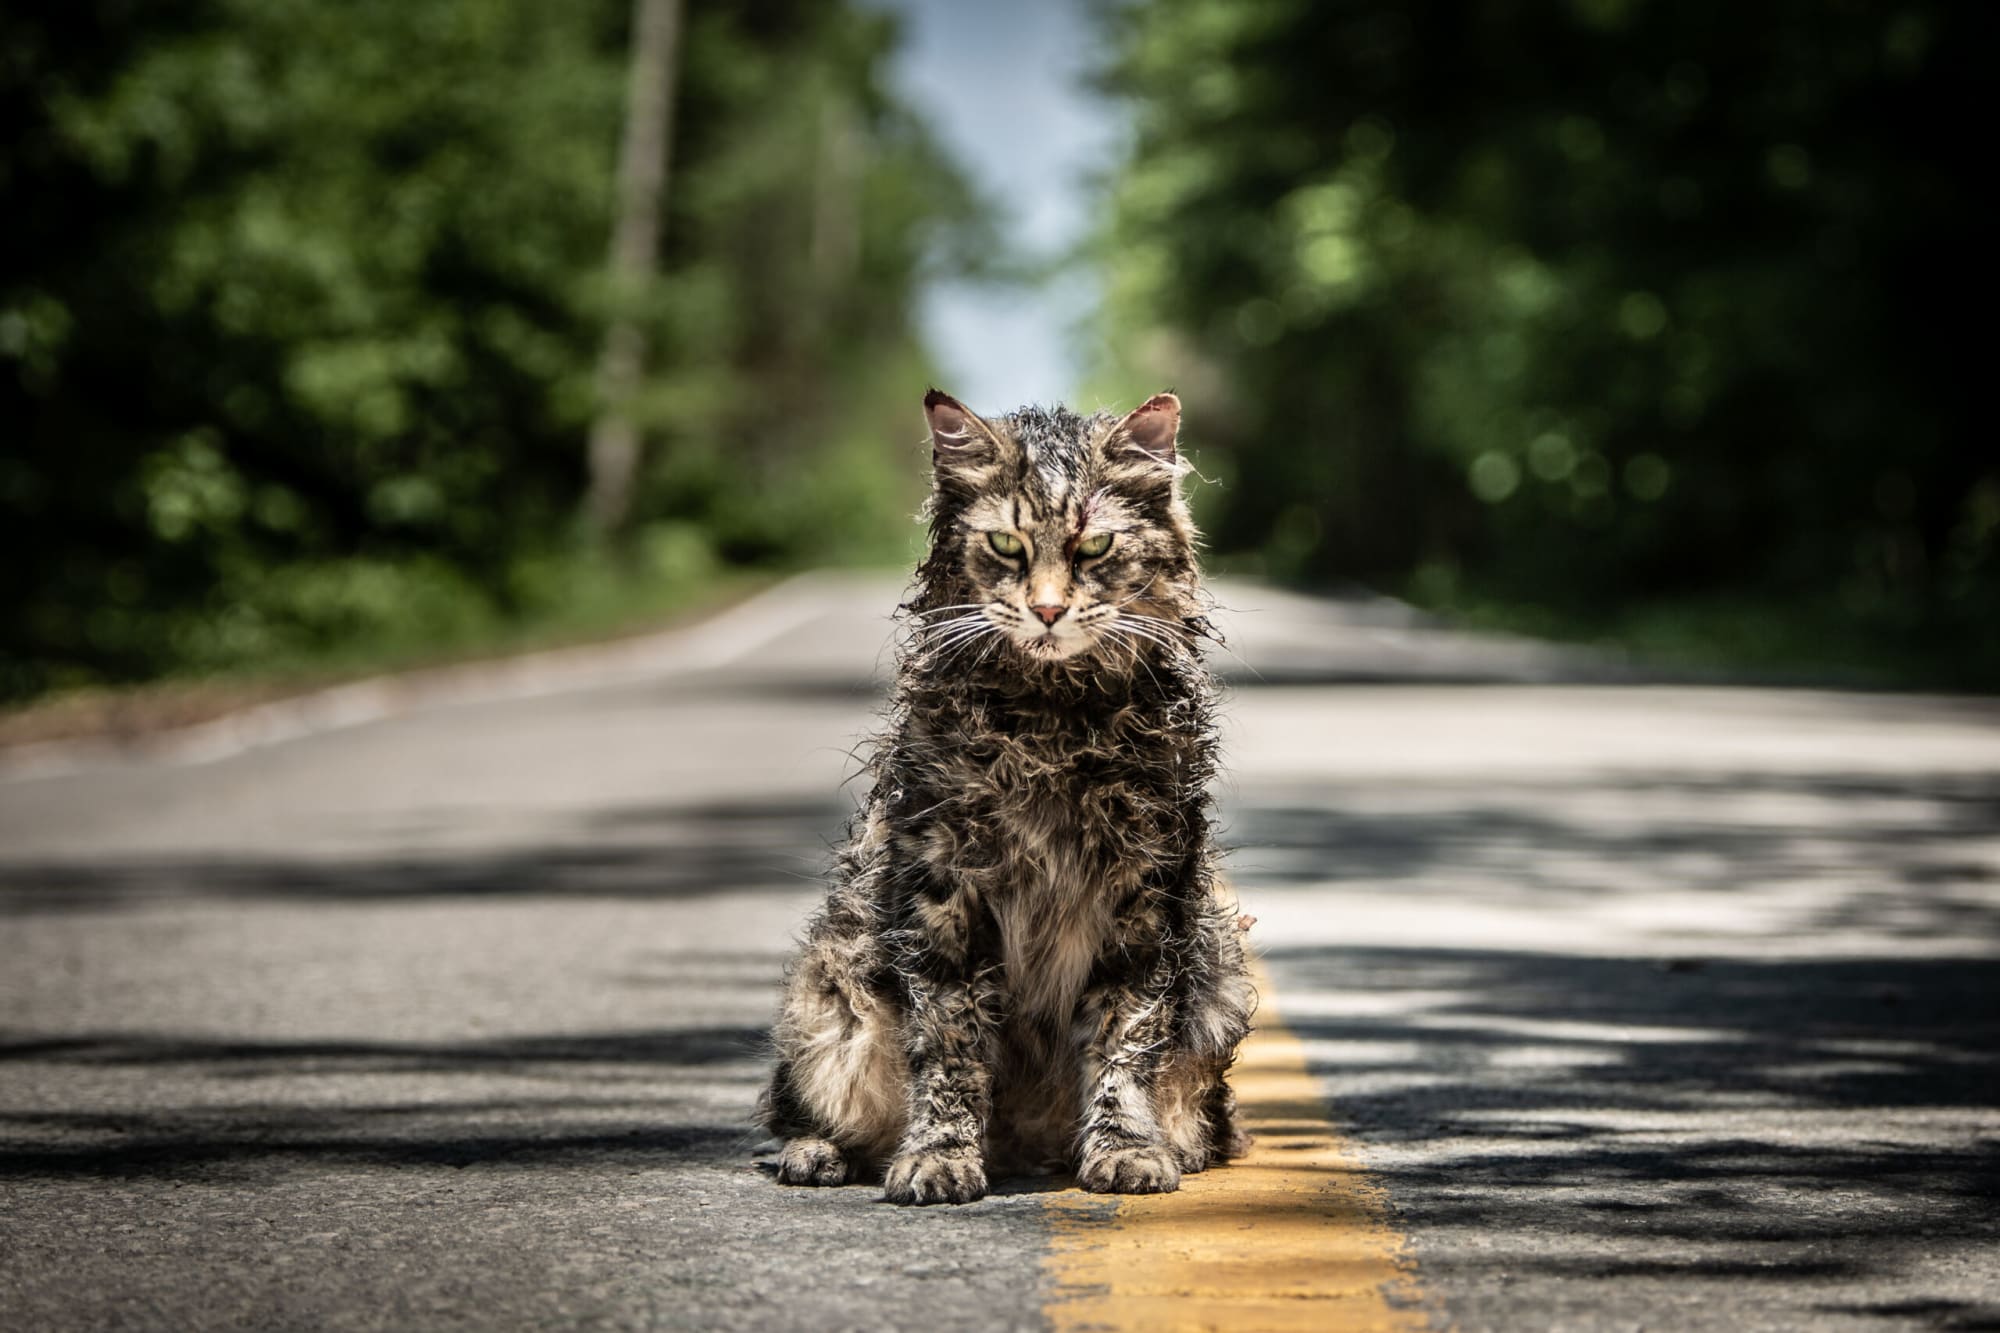 Pet Sematary Bloodlines release date and everything we know